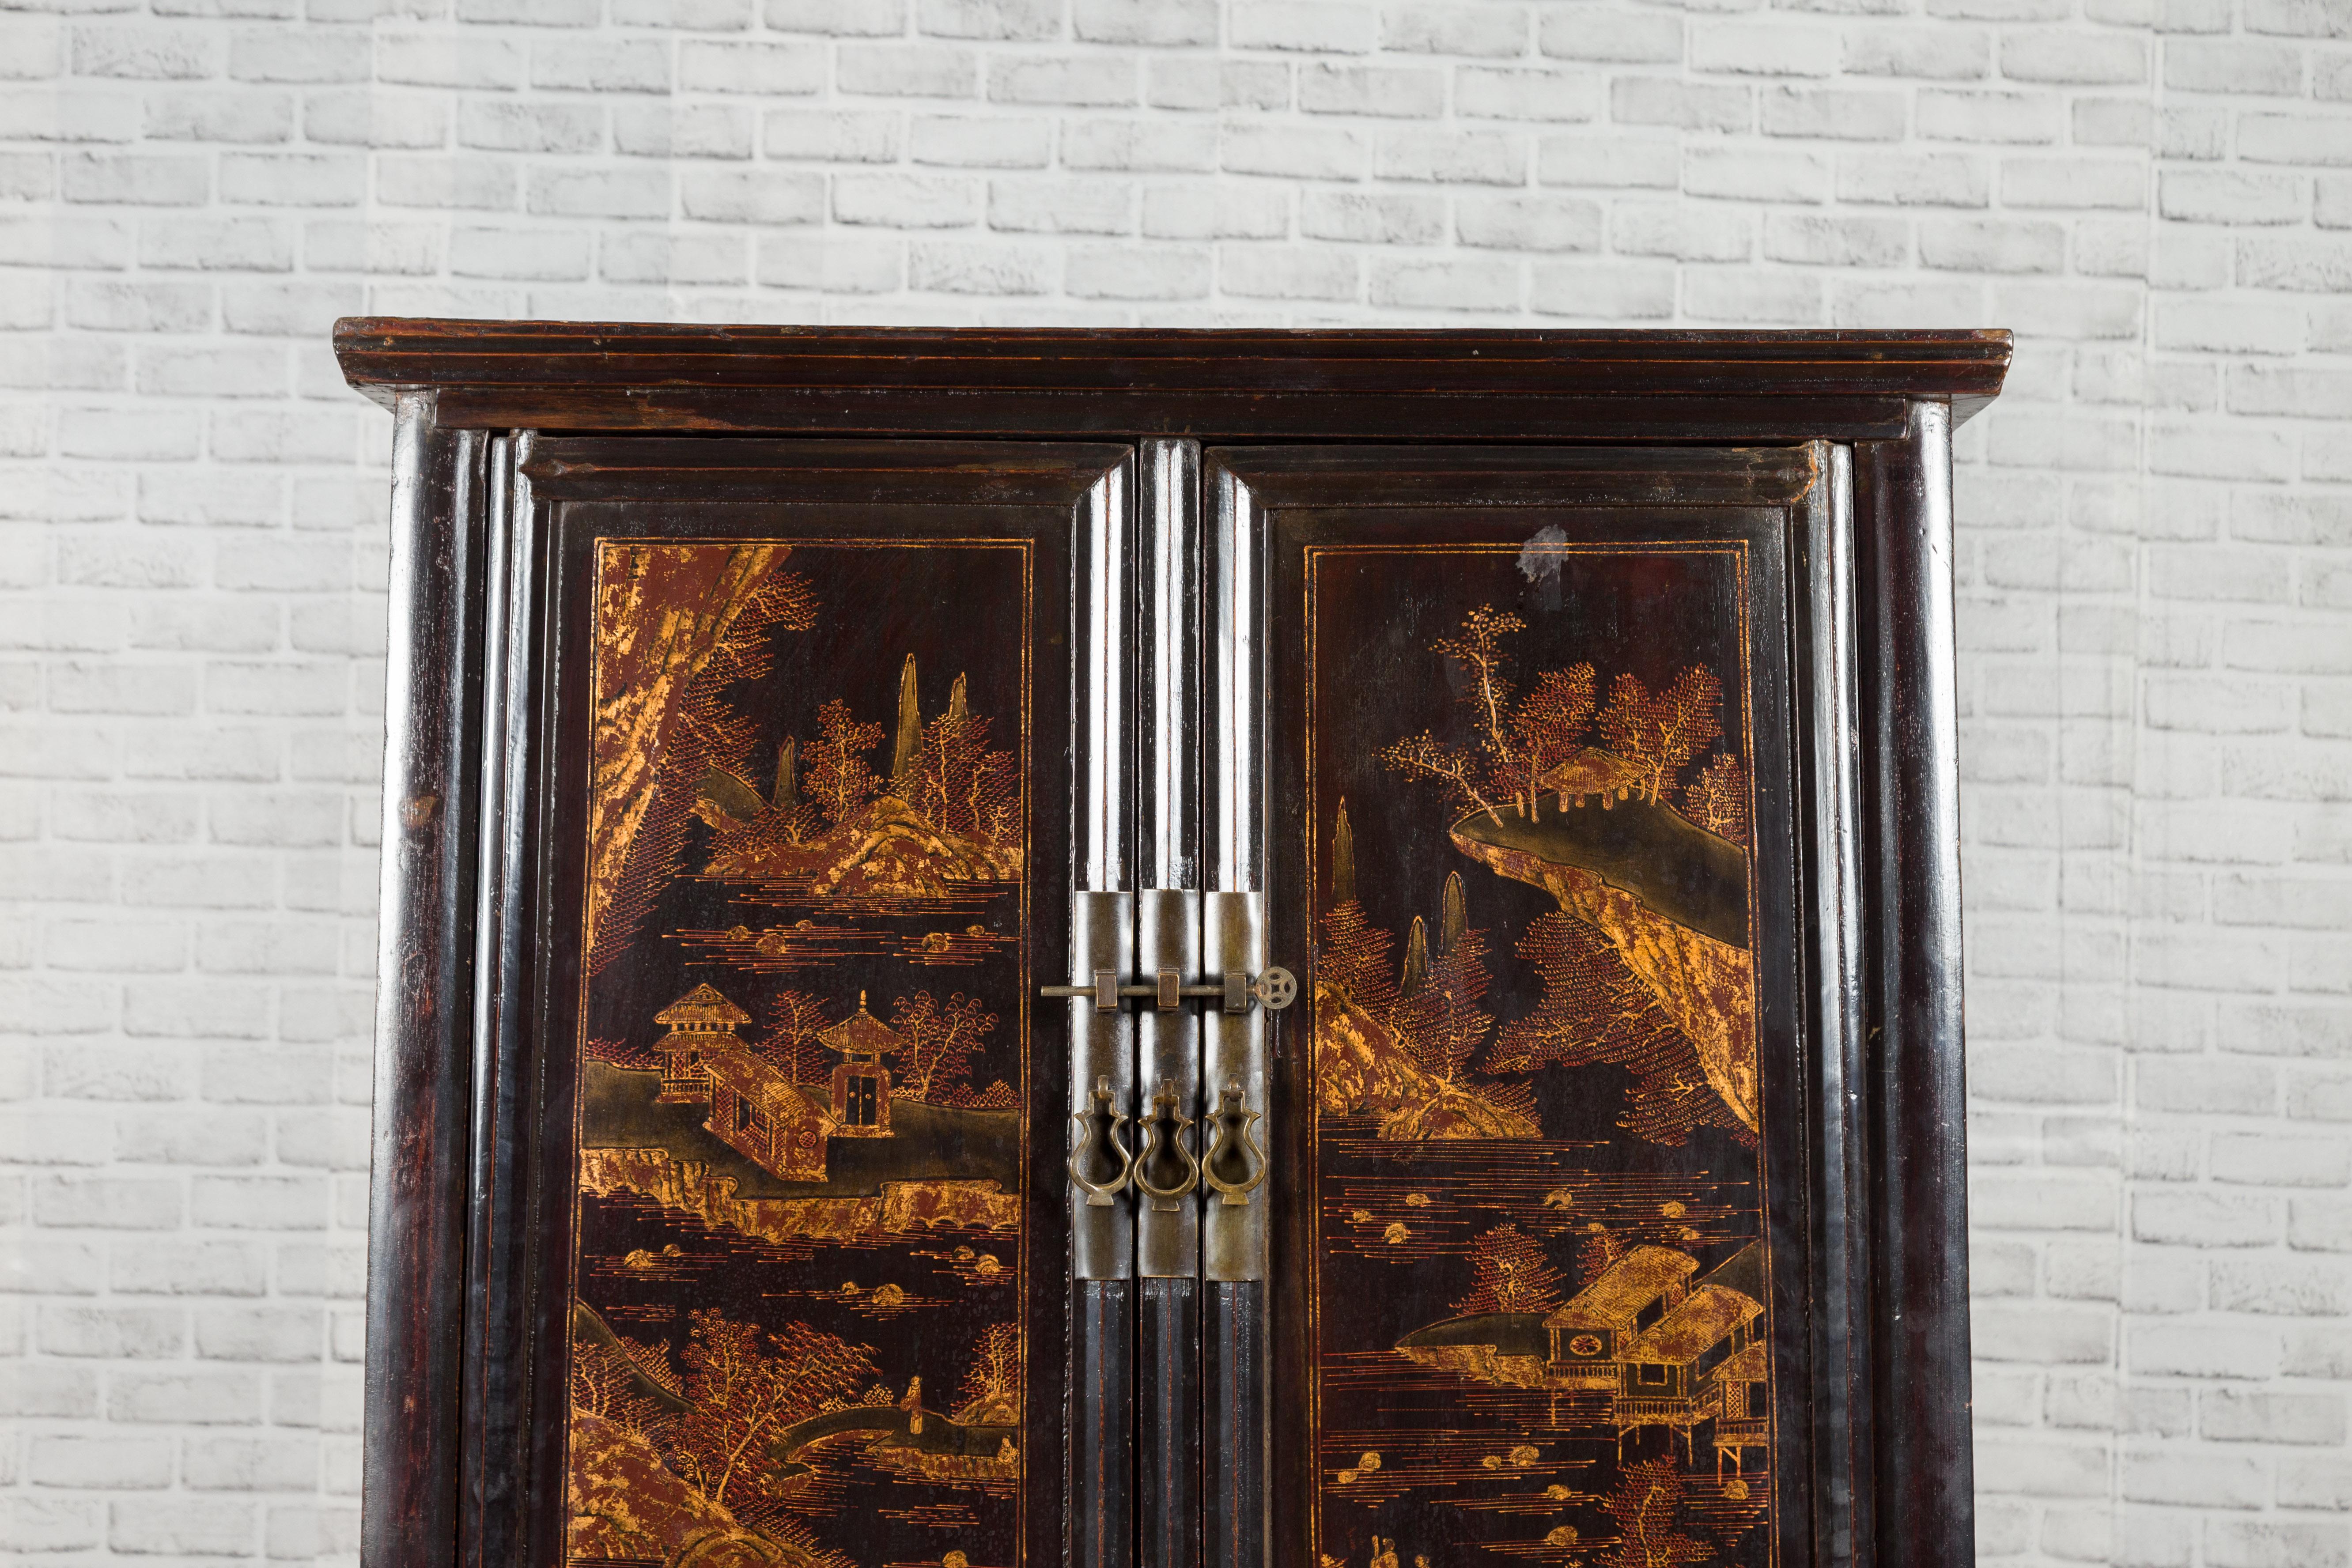 19th Century Chinese Qing Dynasty Shanxi Black Lacquer Cabinet with Golden Chinoiserie Décor